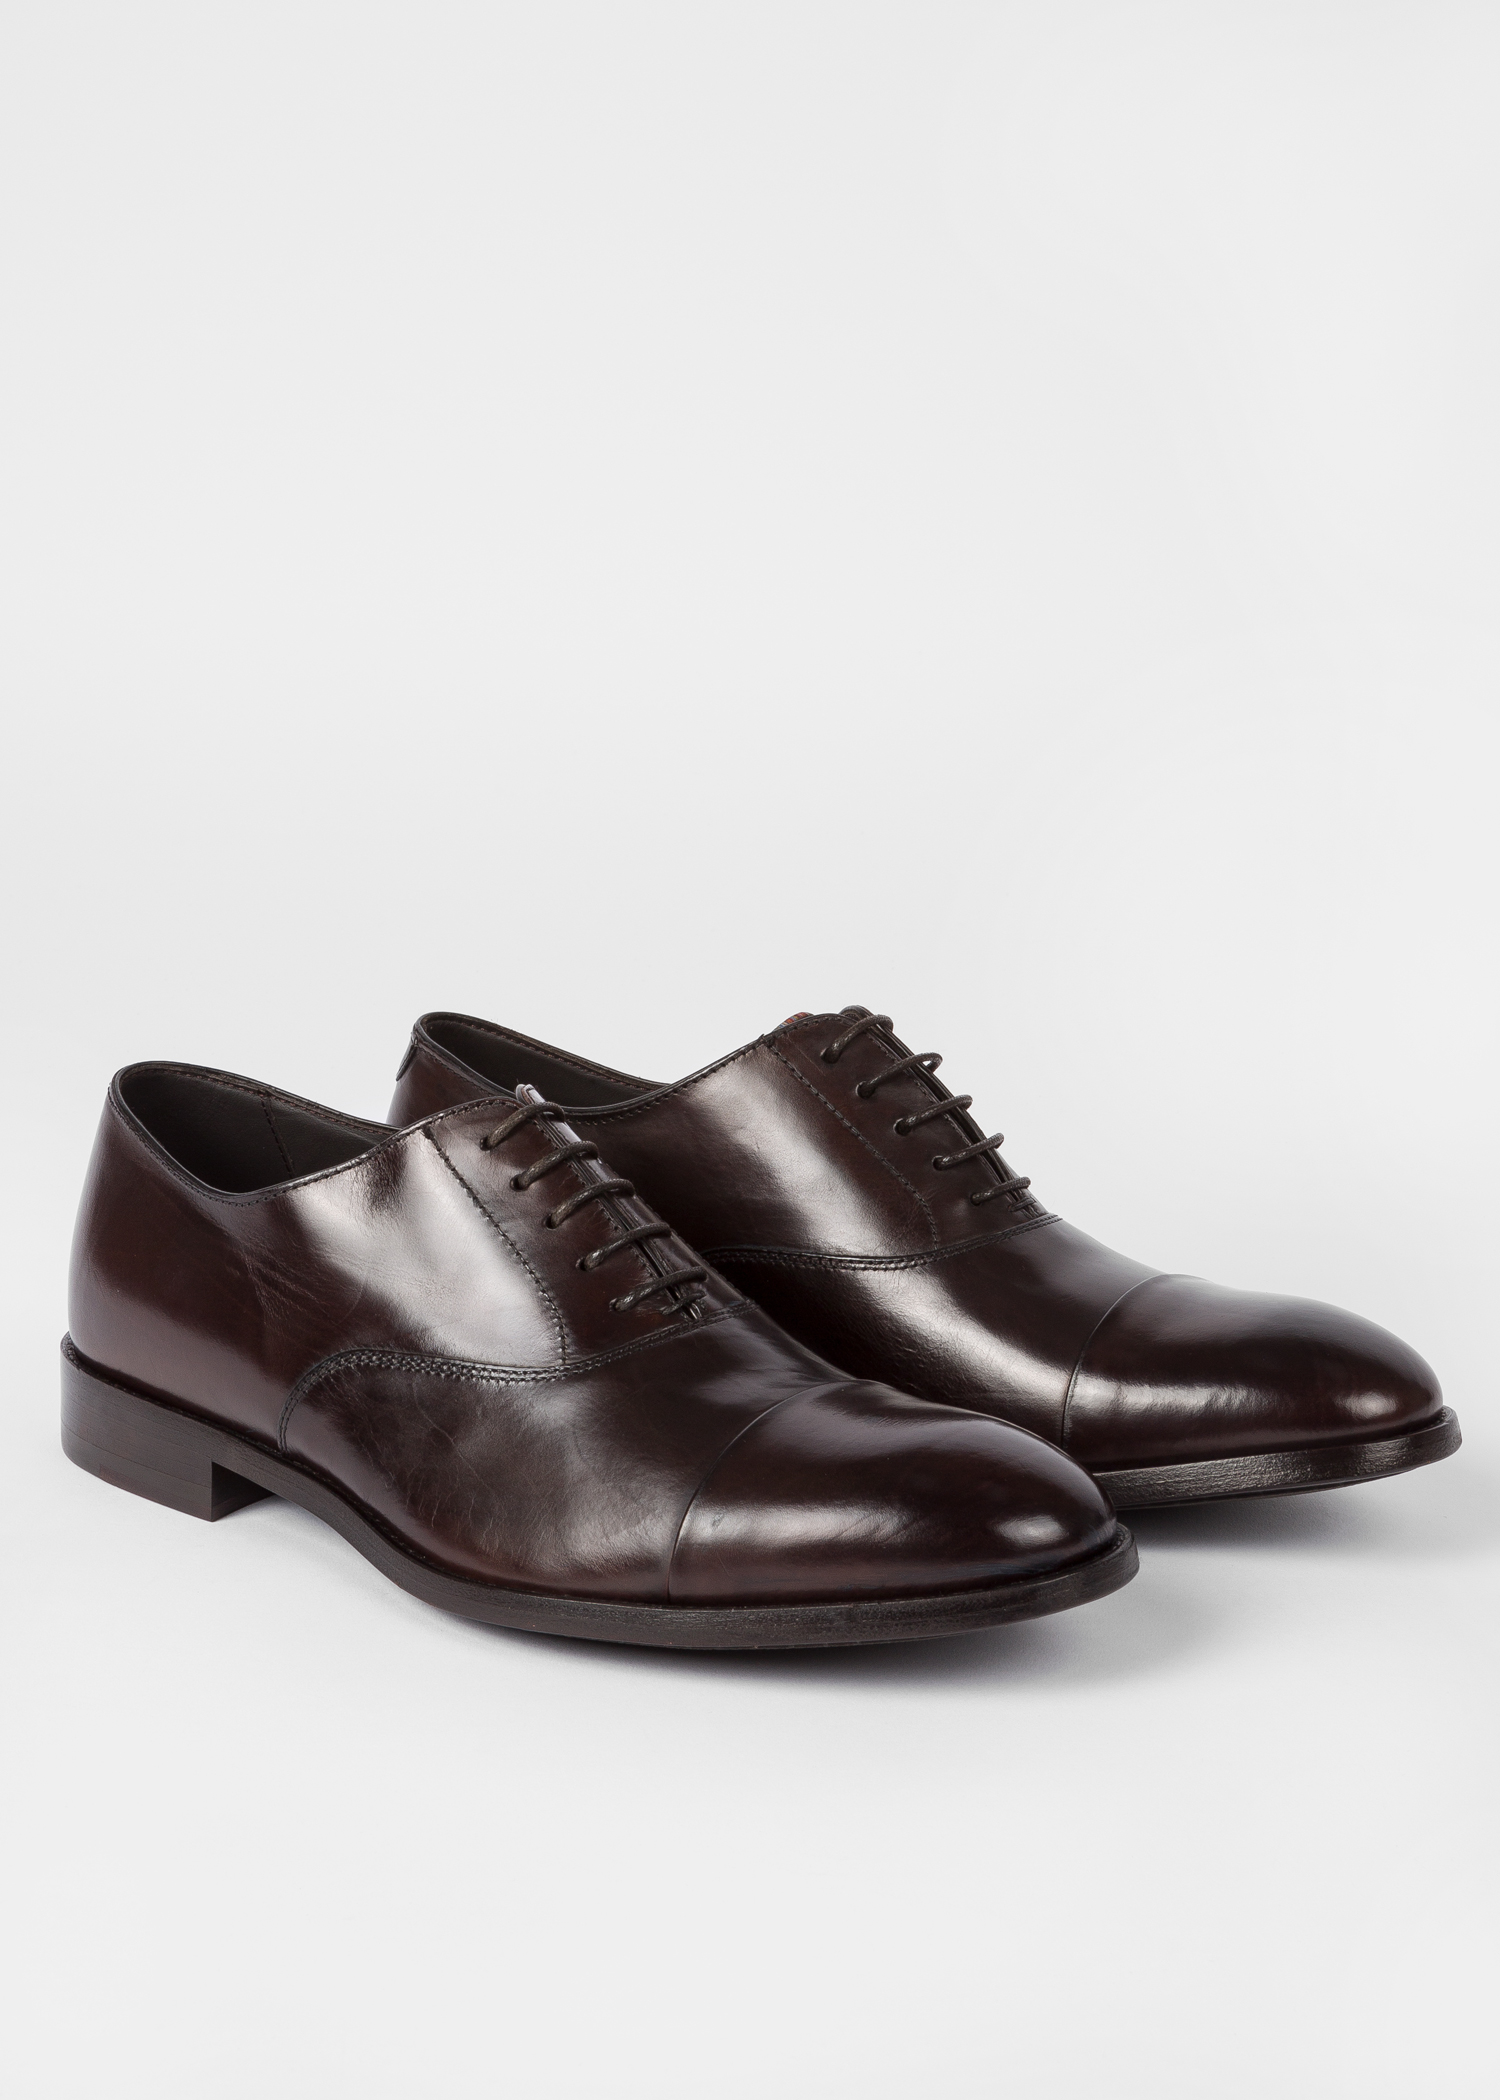 kans draaipunt Waden Men's Chocolate Brown Leather 'Brent' Oxford Shoes With 'Signature Stripe'  Details